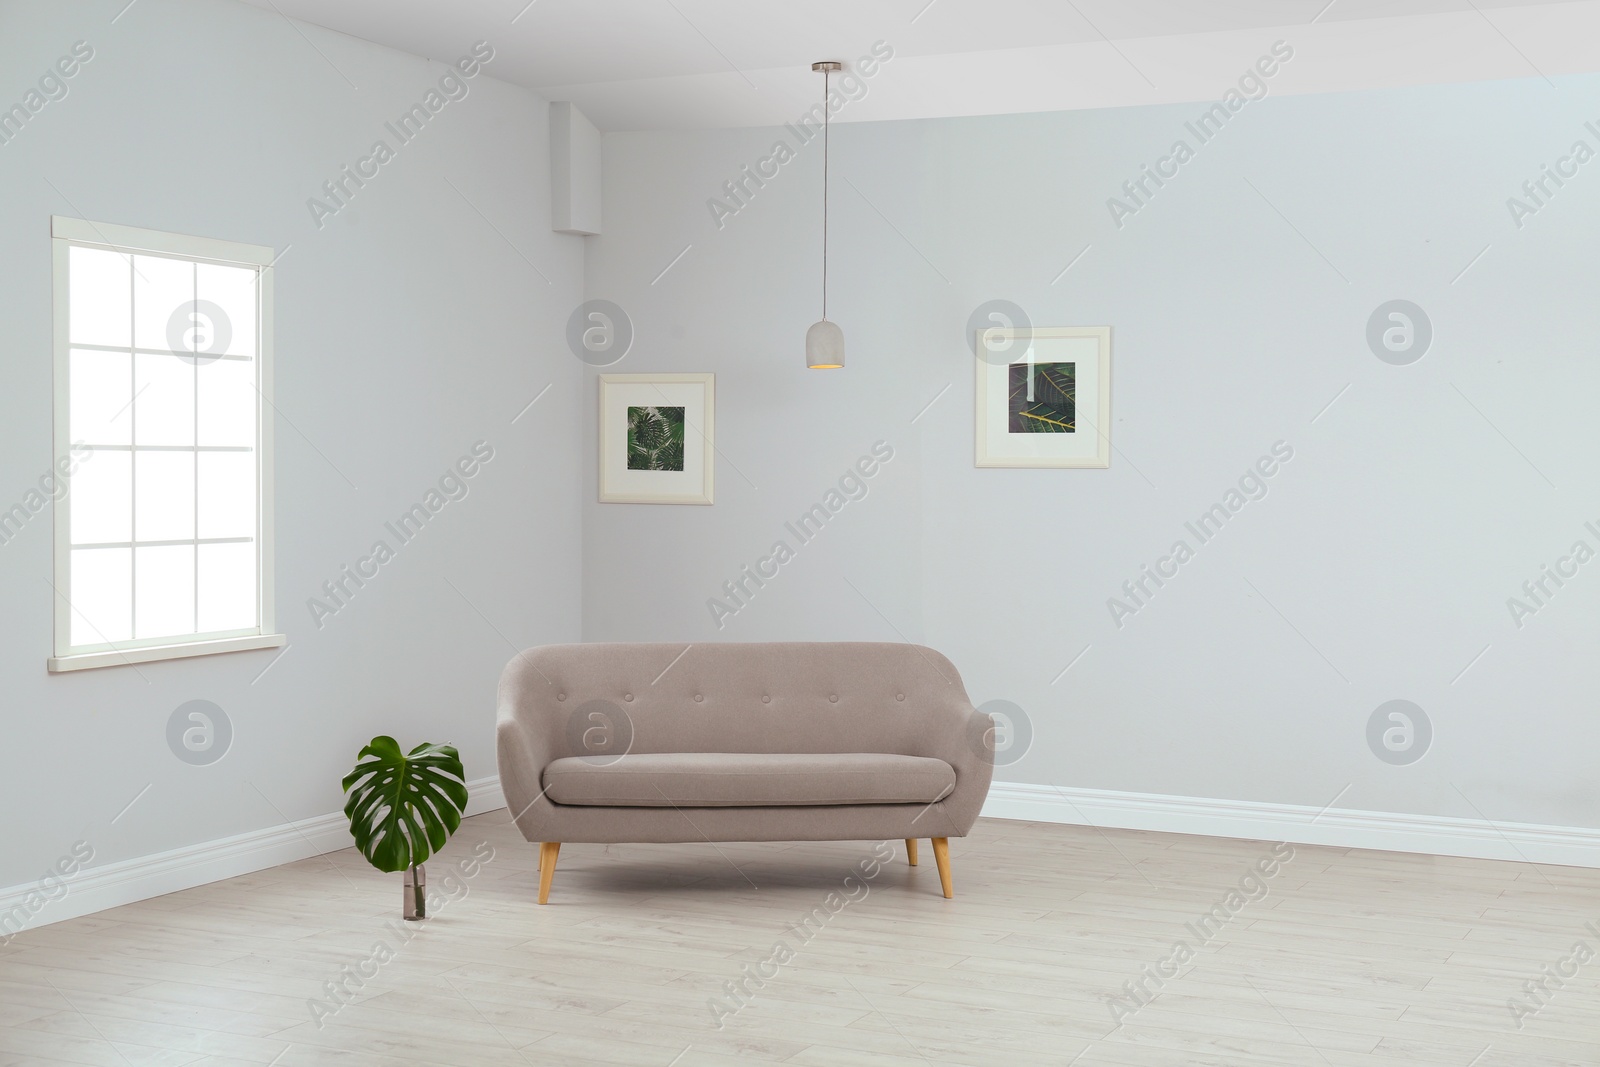 Photo of Living room interior with comfortable sofa near light wall